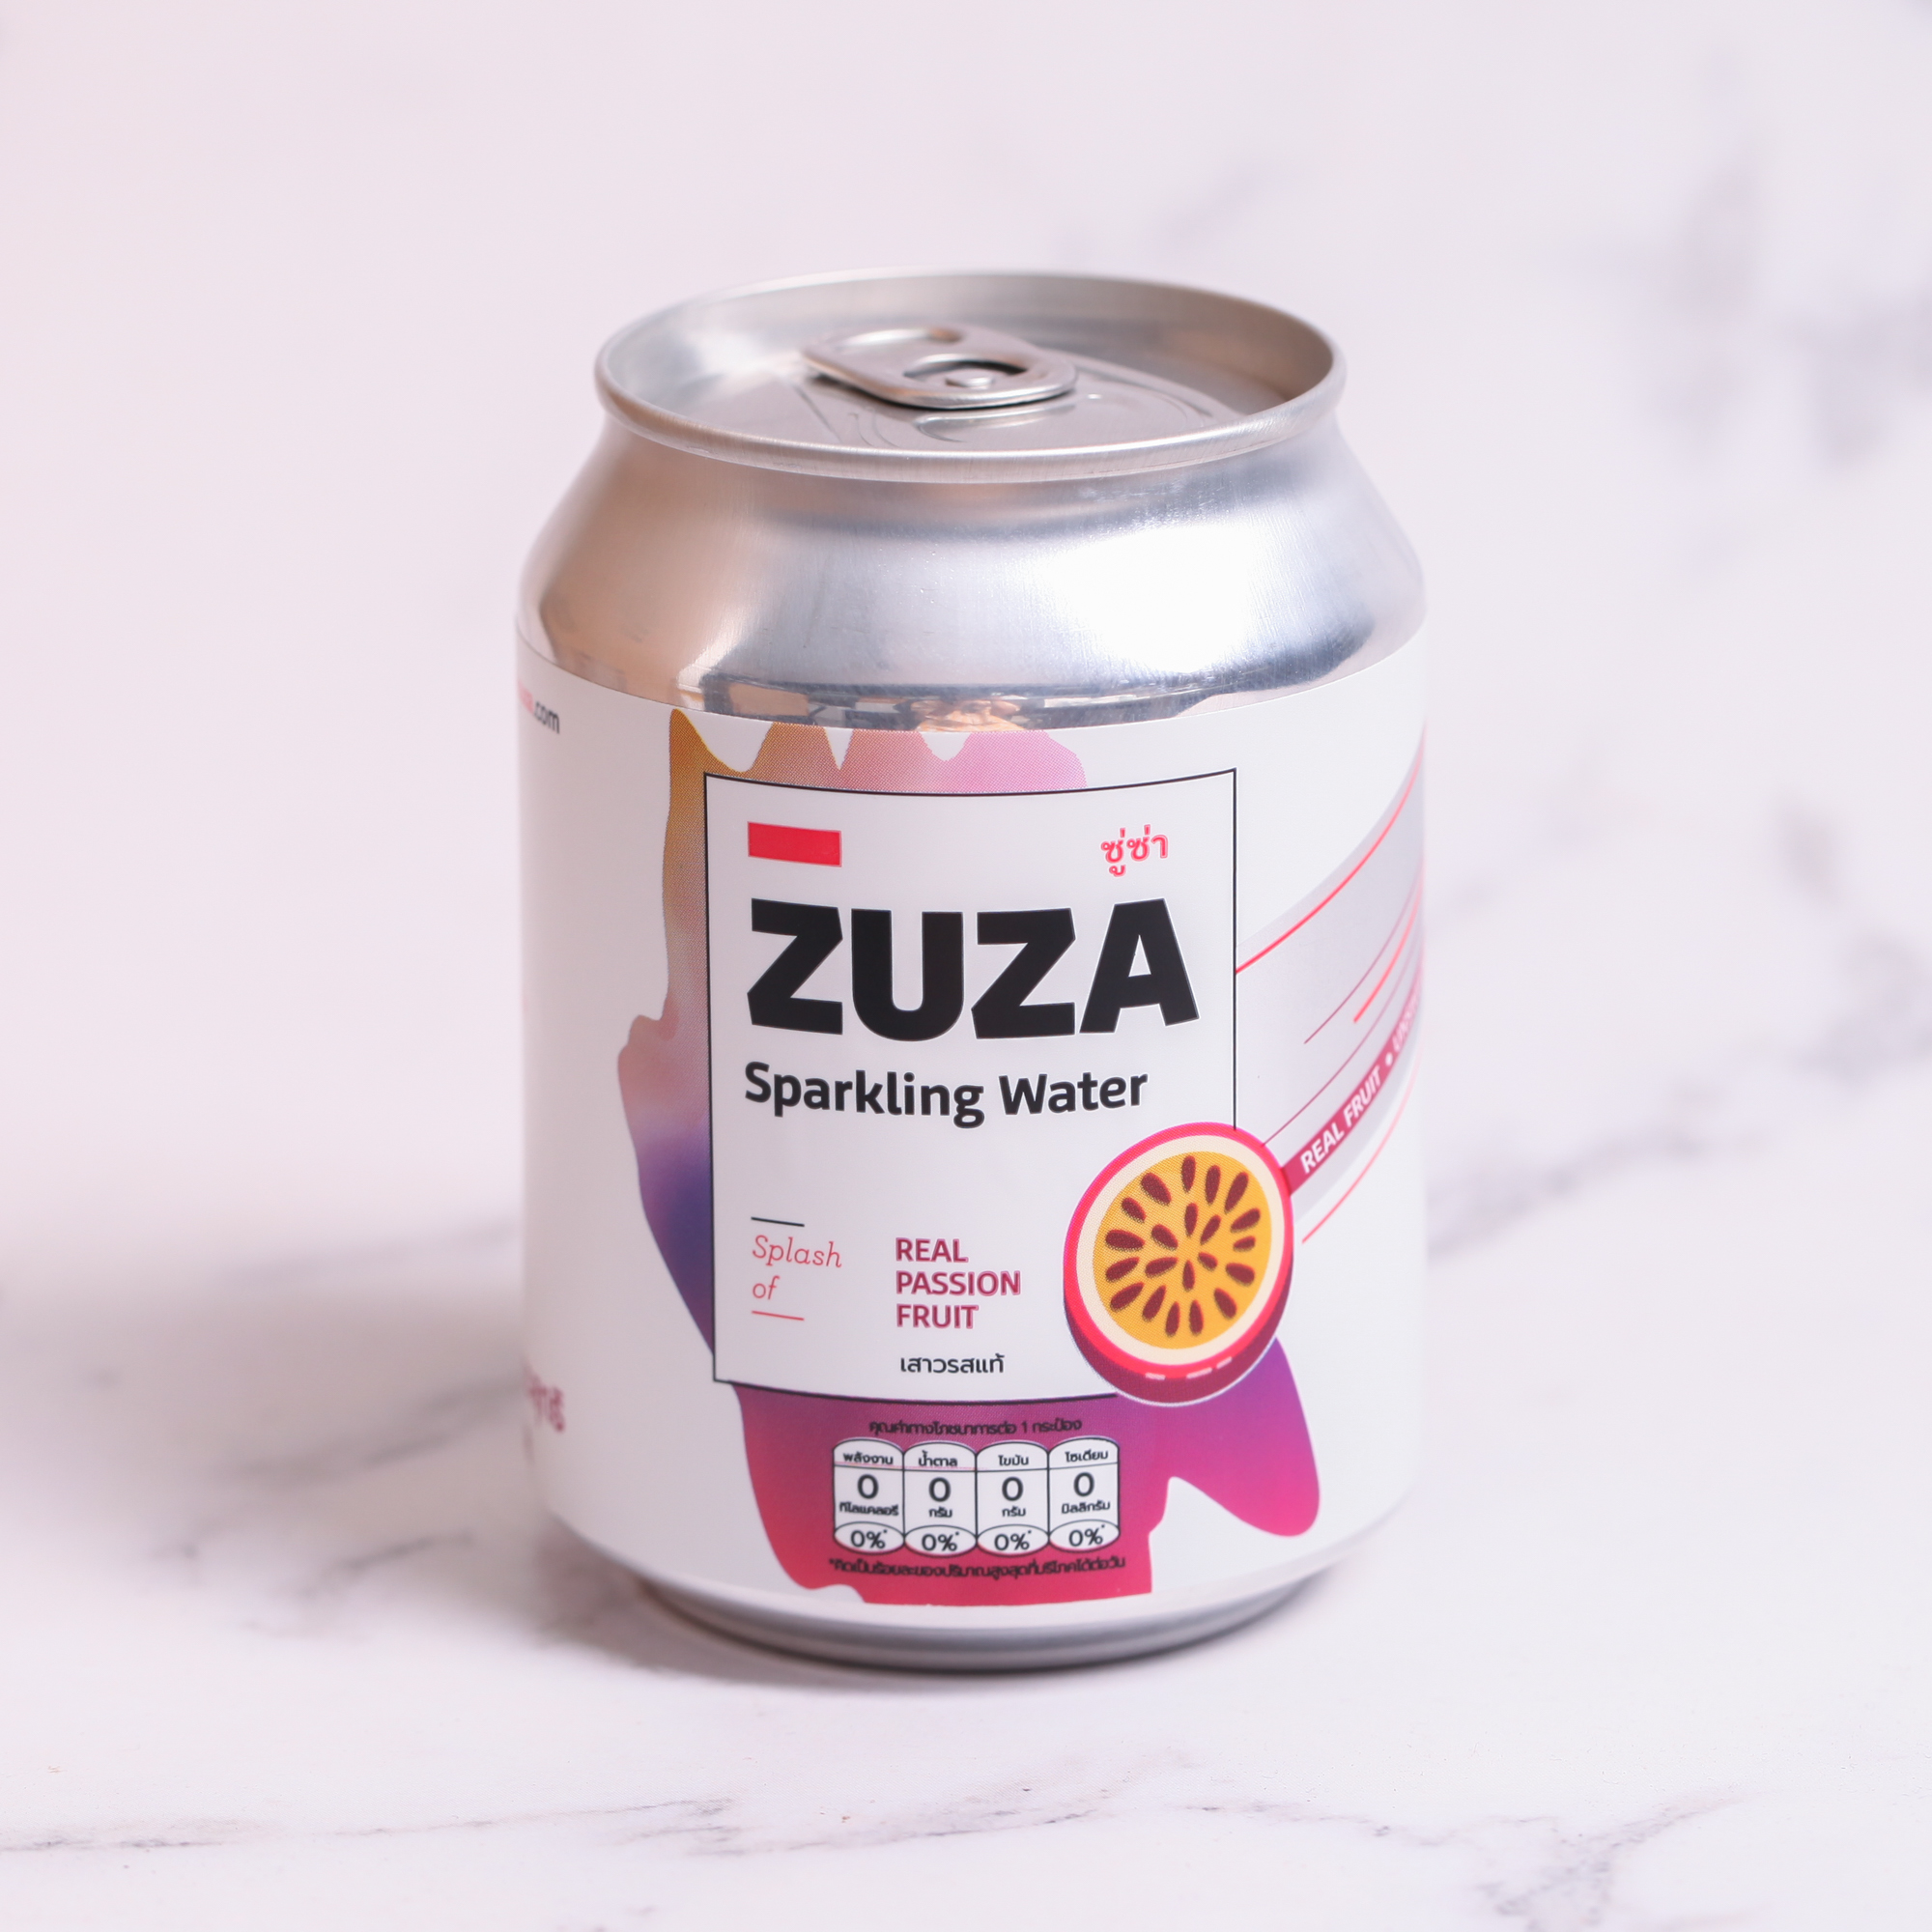 ZUZA Passion Fruit Sparkling Water